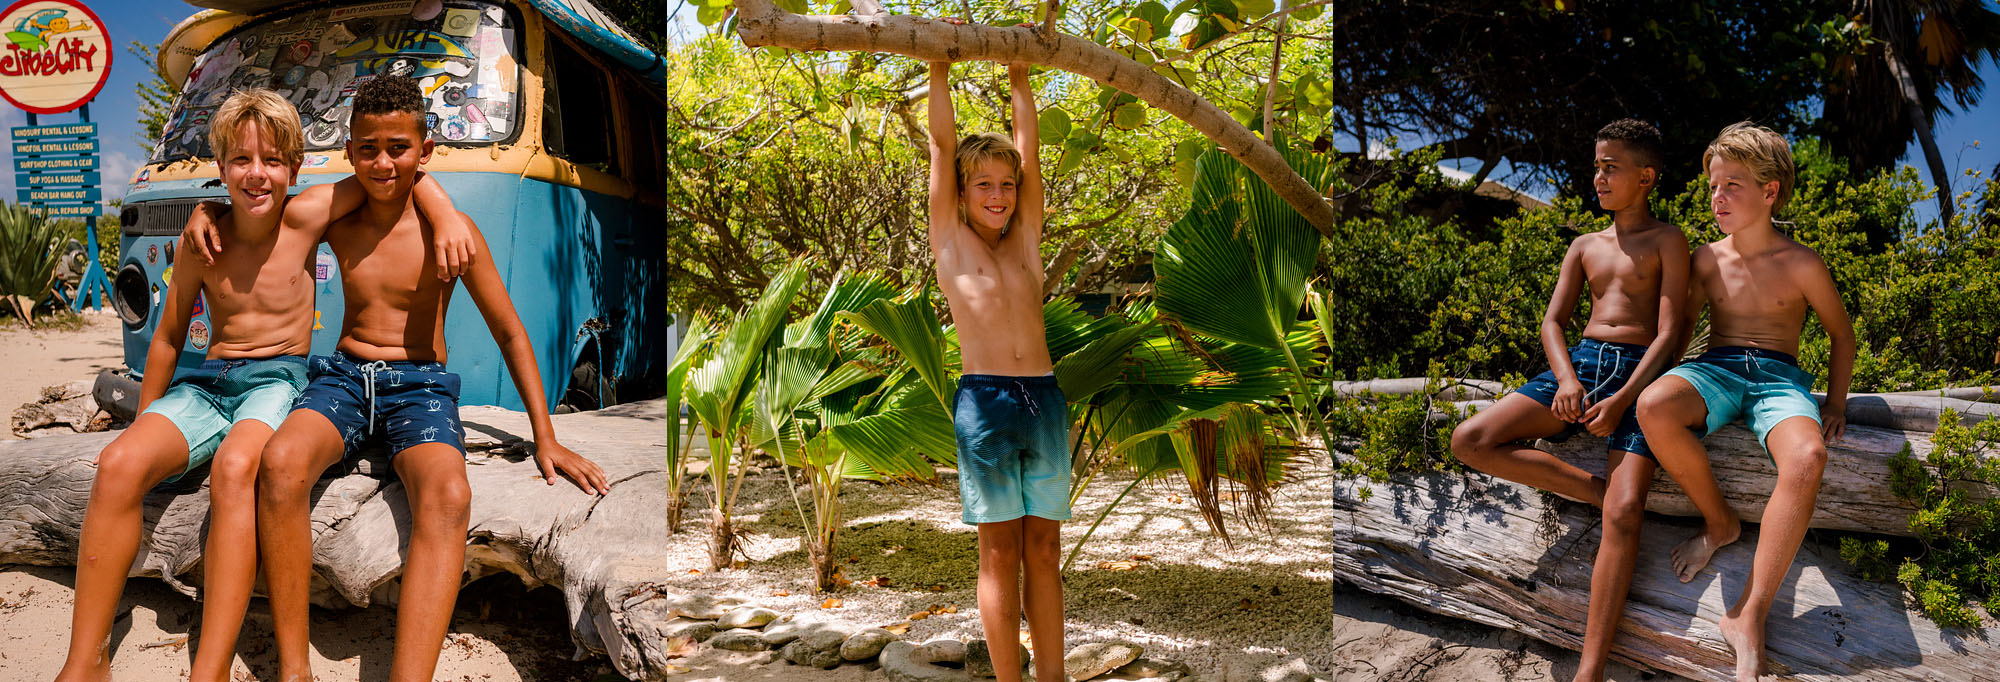 Boys playing on the beach, hanging in trees and having fun in the warm sun. They wear their quick drying Brunotti shorts feeling great.